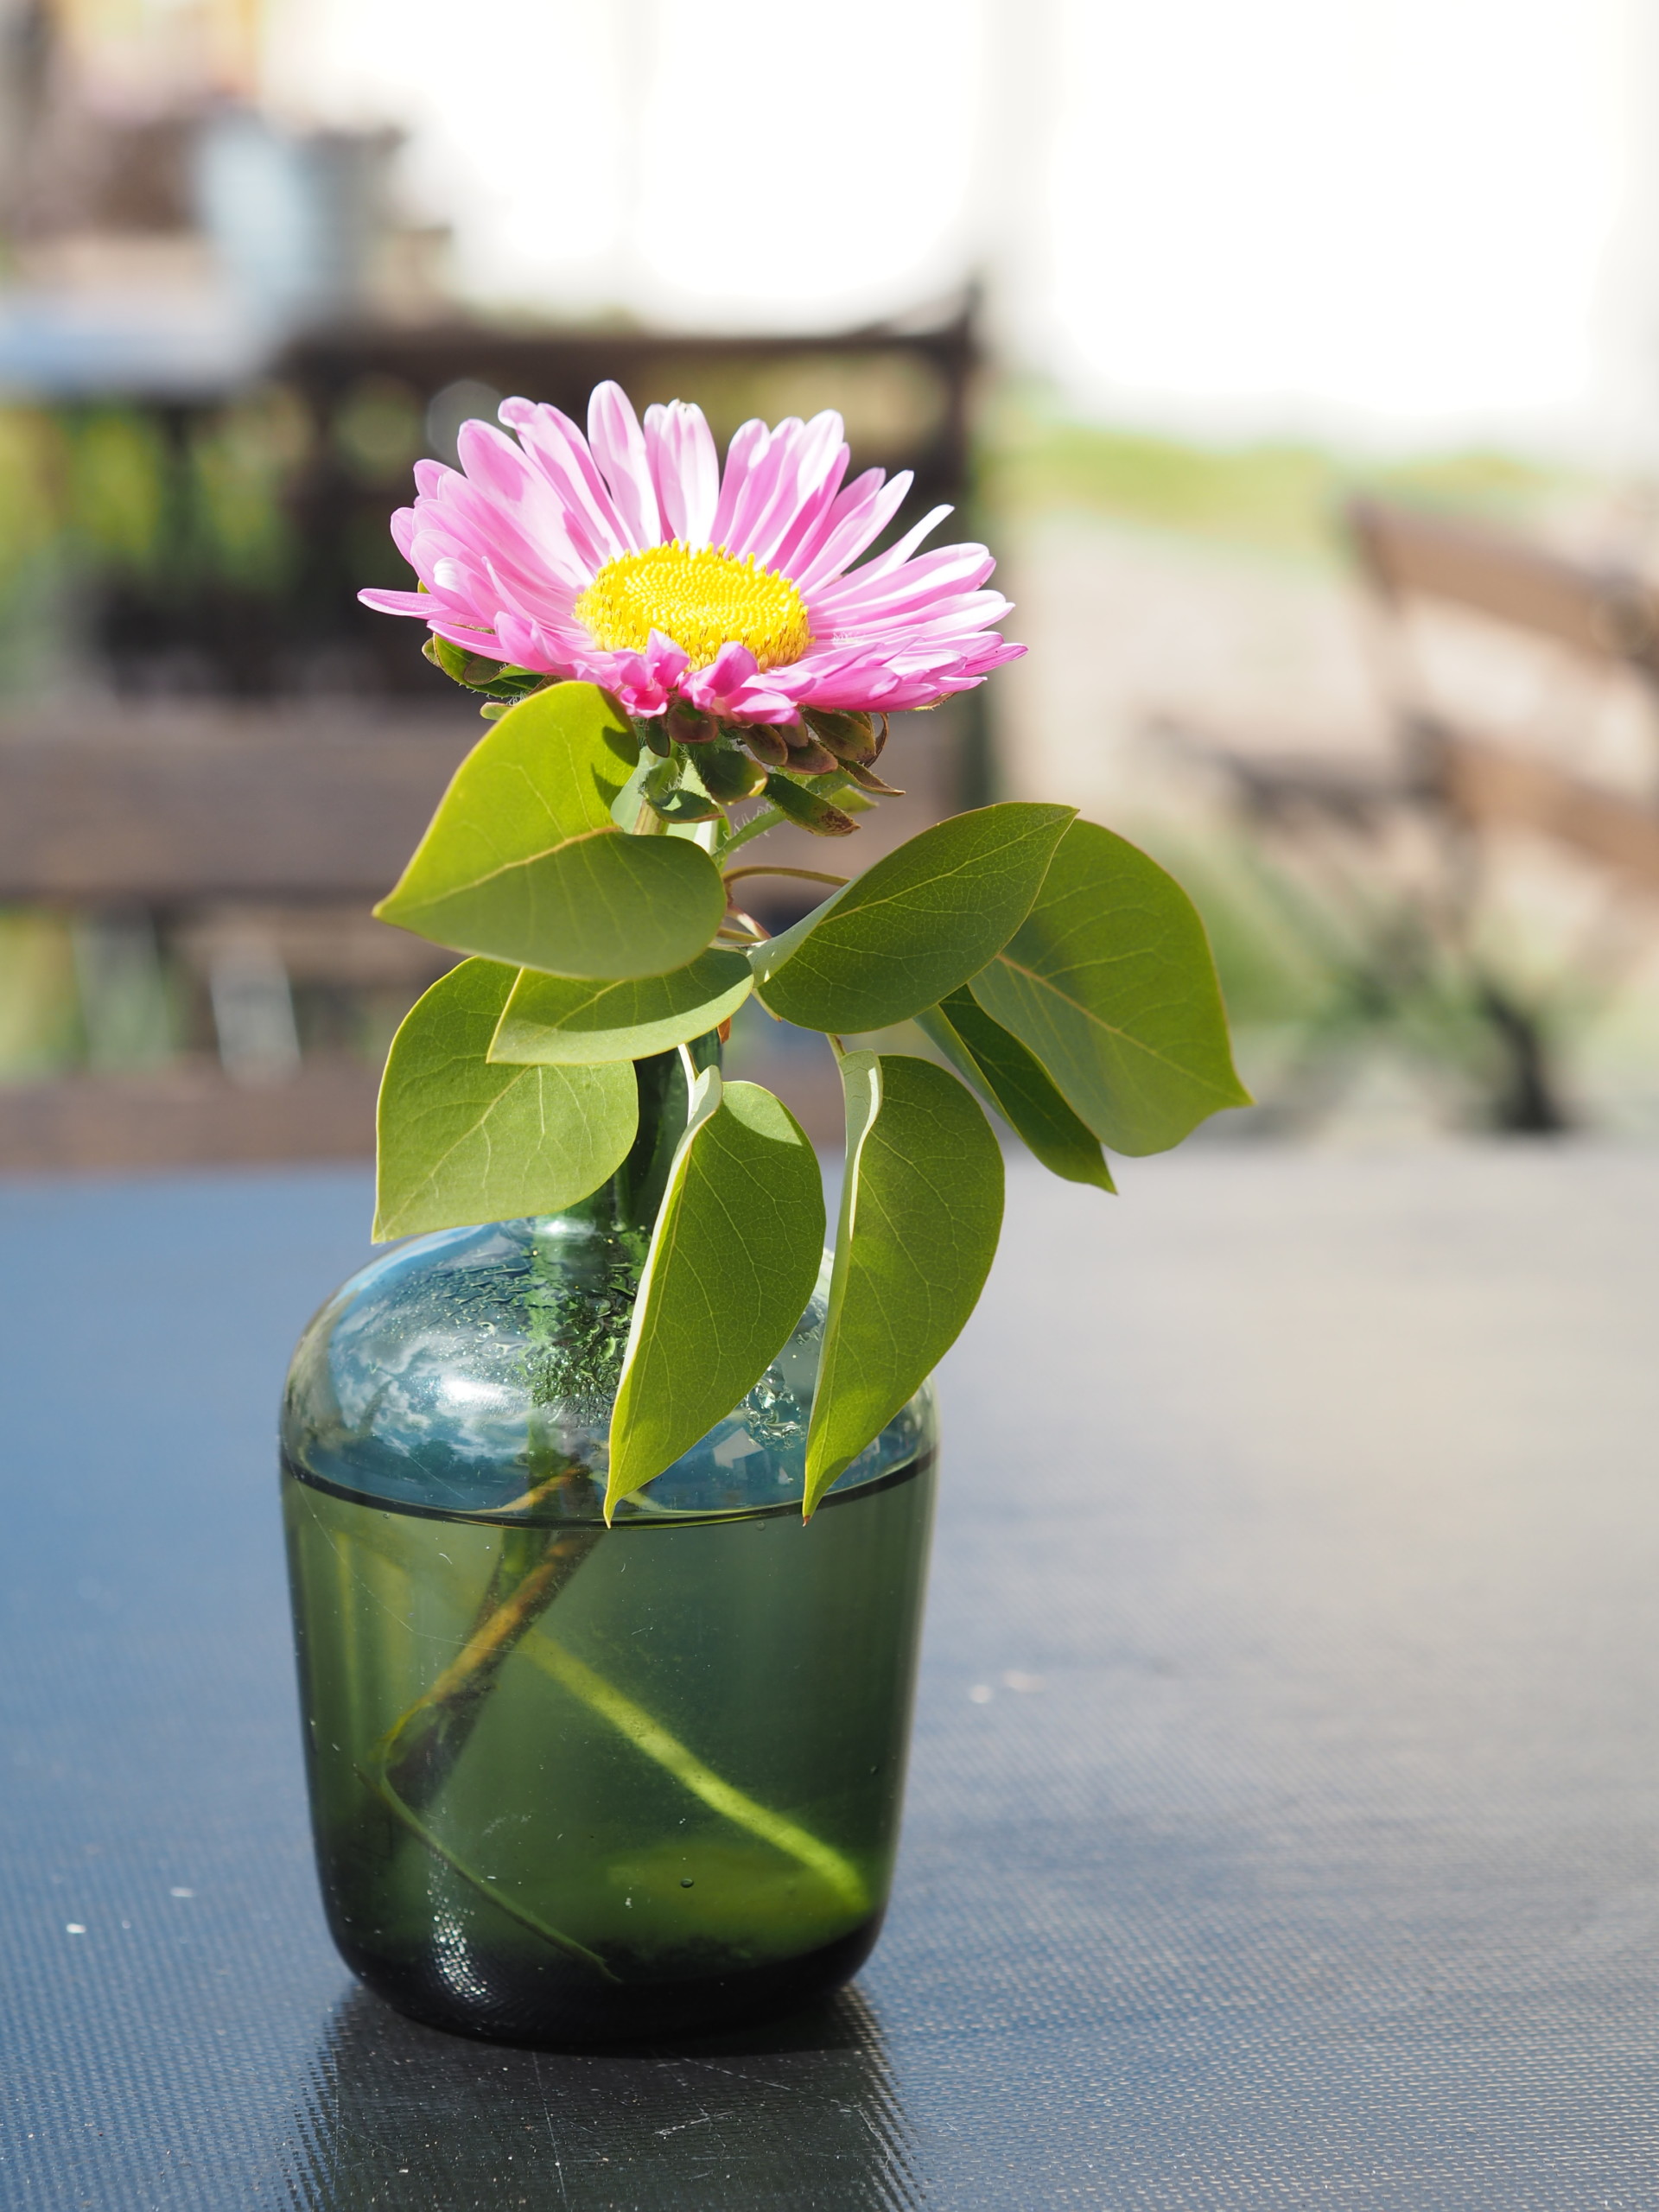 A pink flower and green leaves in a vase.